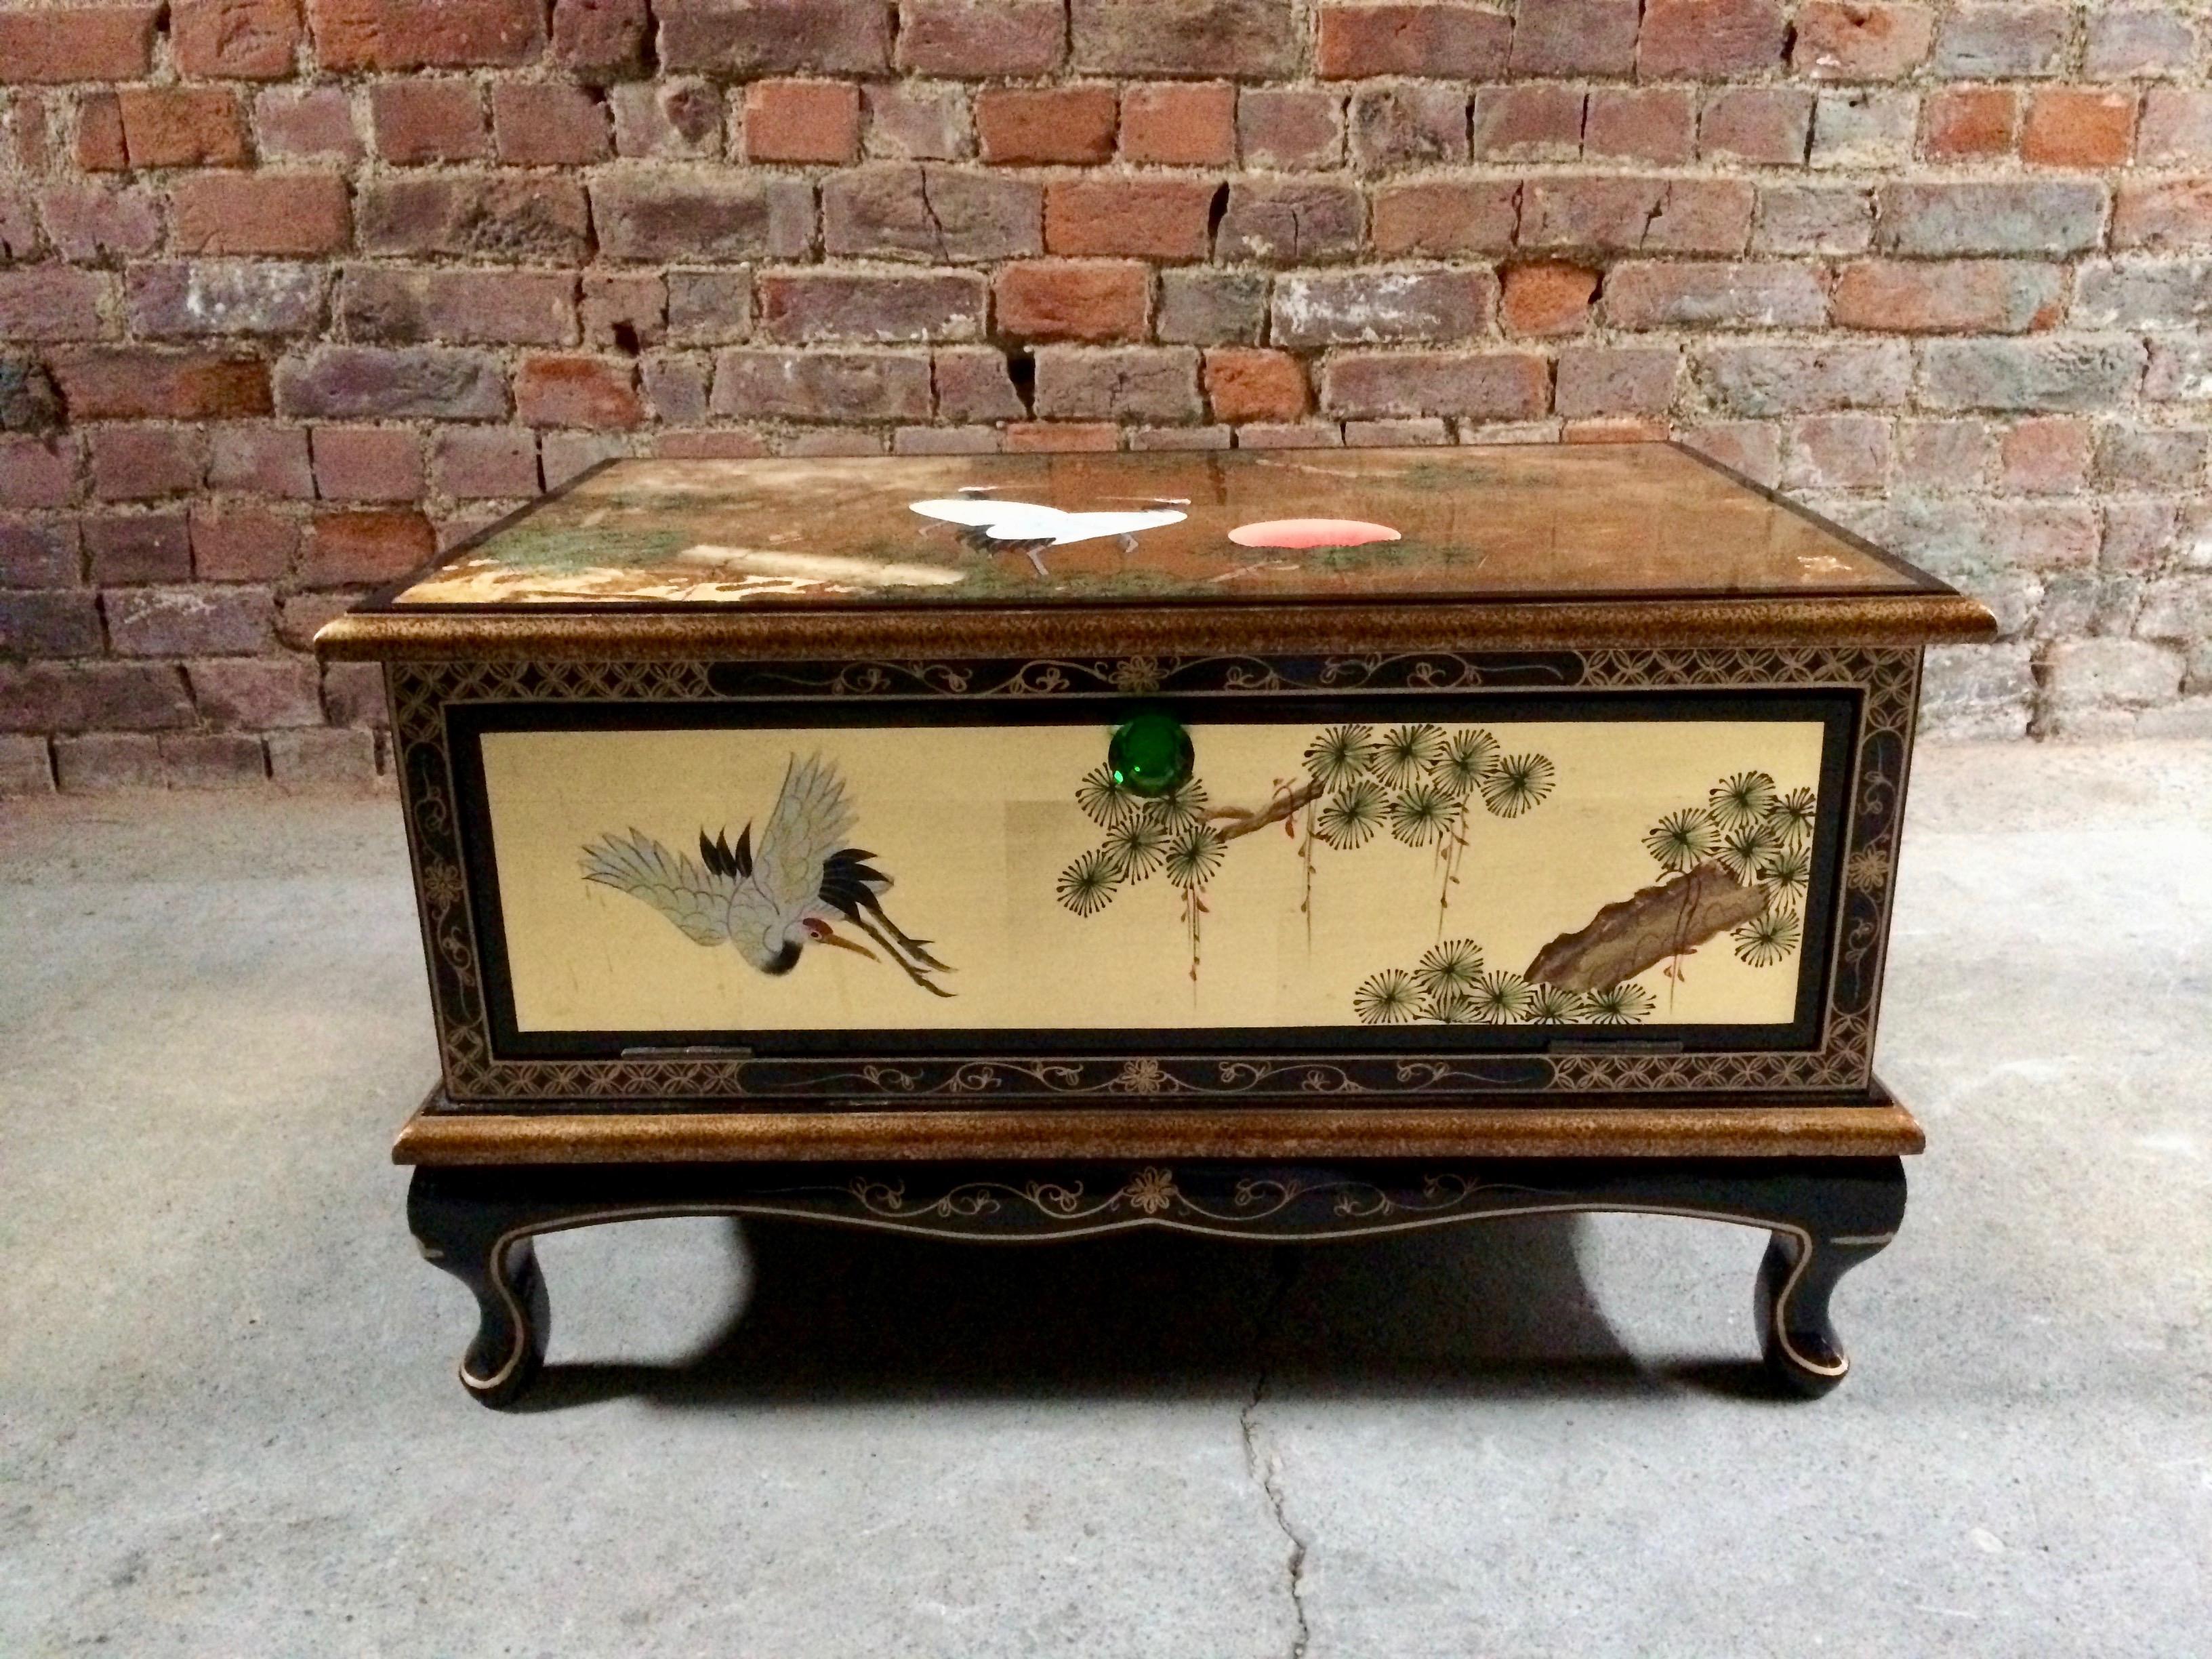 Anglo-Japanese Magnificent Gilded Japanese Bedside Cabinets Nightstands and Trunk Lacquered